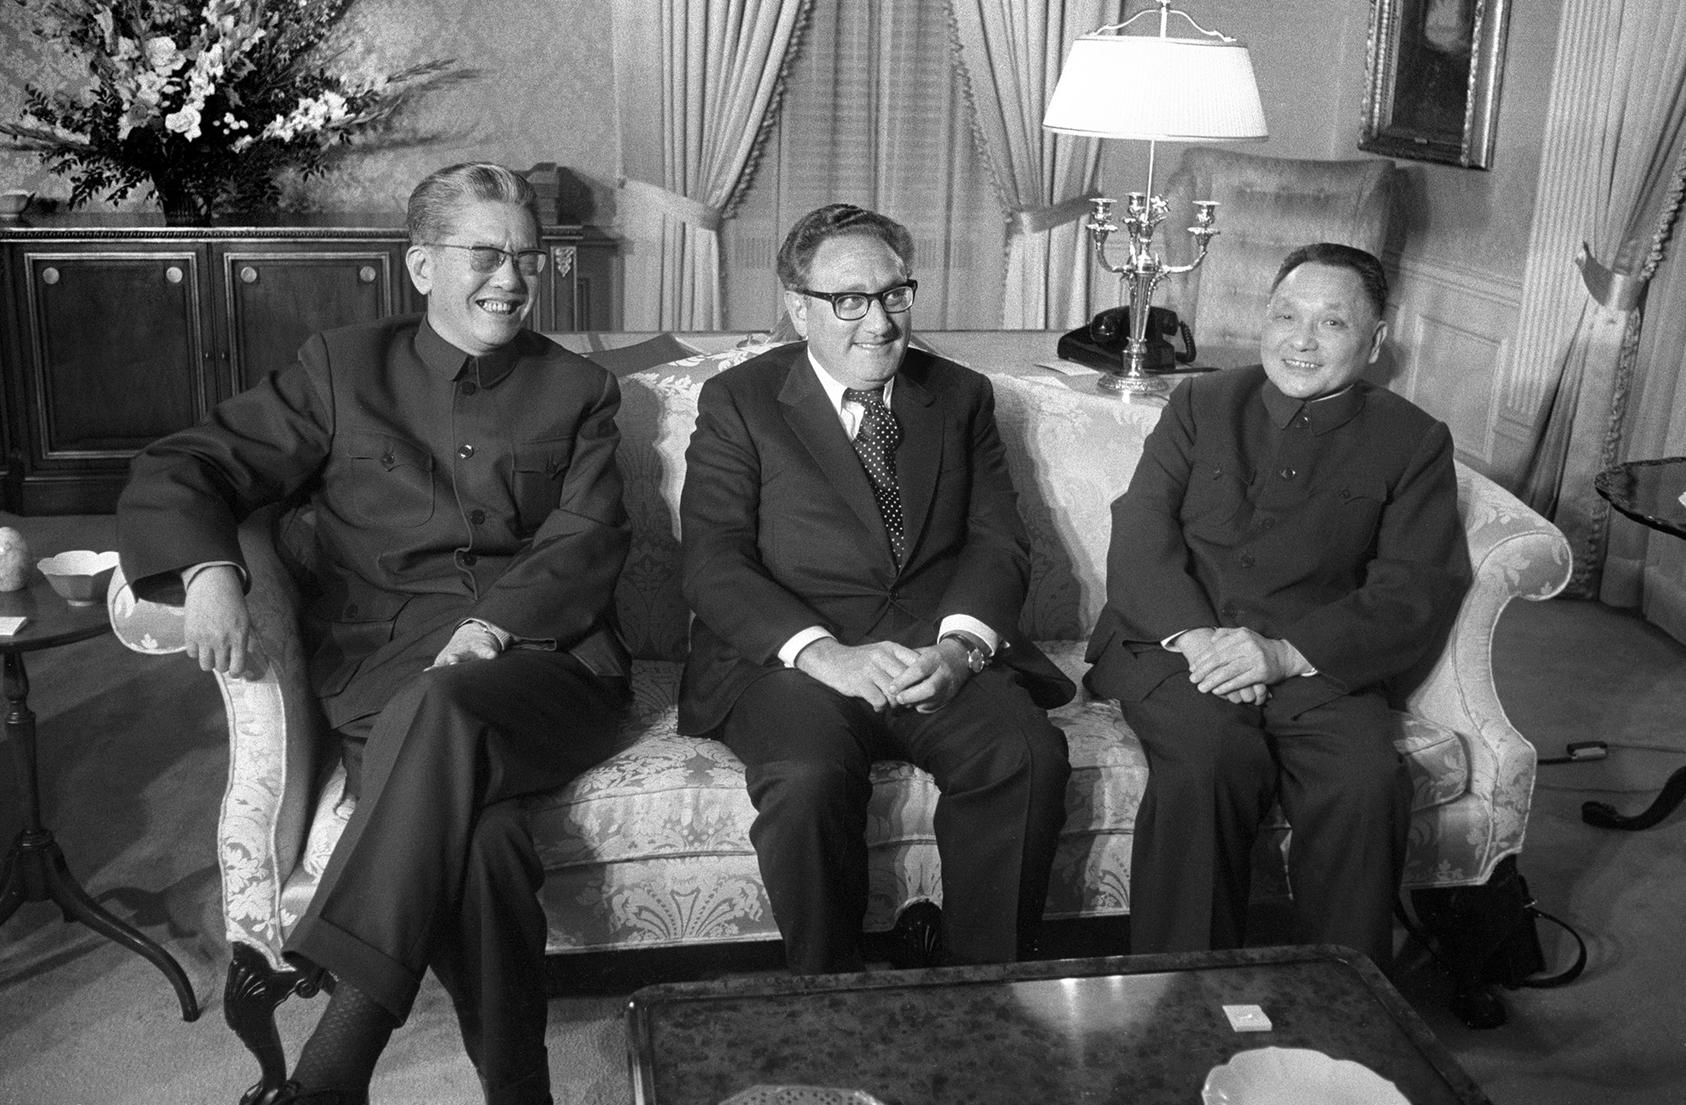 Chinese Foreign Minister Chiao Kuan-Hua, U.S. Secretary of State Henry Kissinger and Chinese Vice Premier Deng Xiaoping during a dinner at the Waldorf Astoria hotel in New York. April 14, 1974. (John Sotomayor/The New York Times)